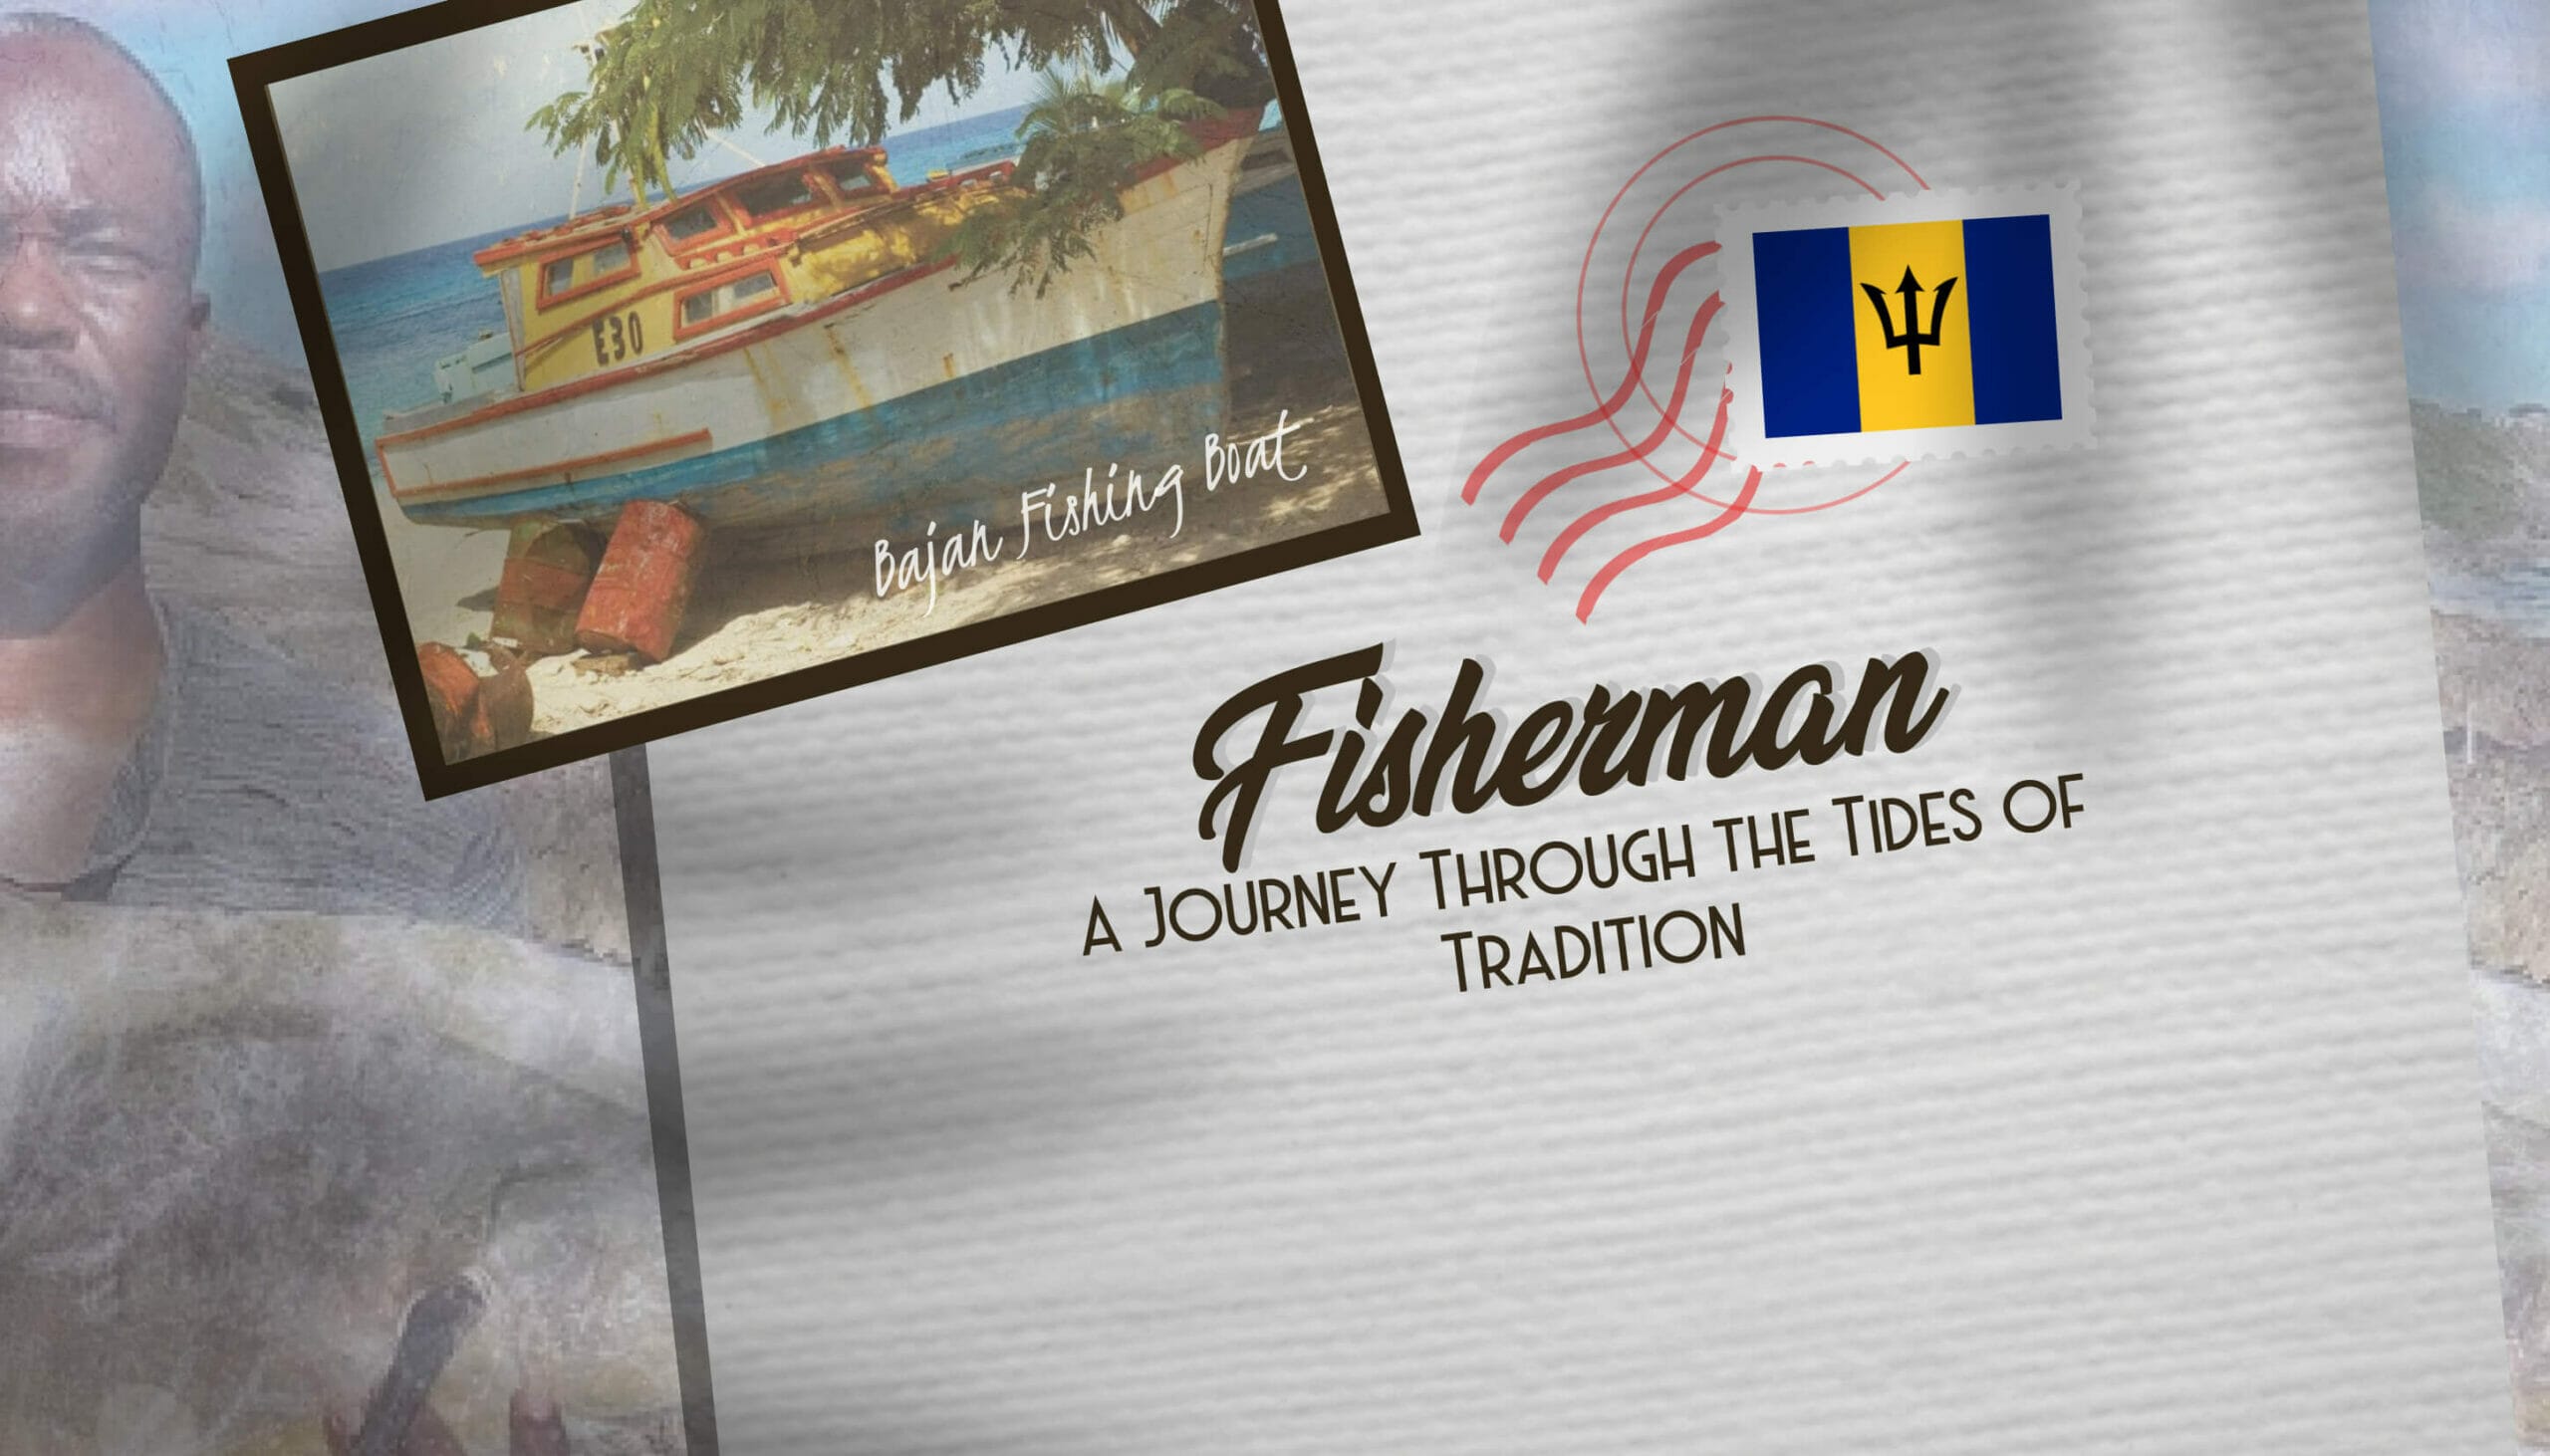 A Day in the Life of a Bajan Fisherman A Journey Through the Tides of Tradition